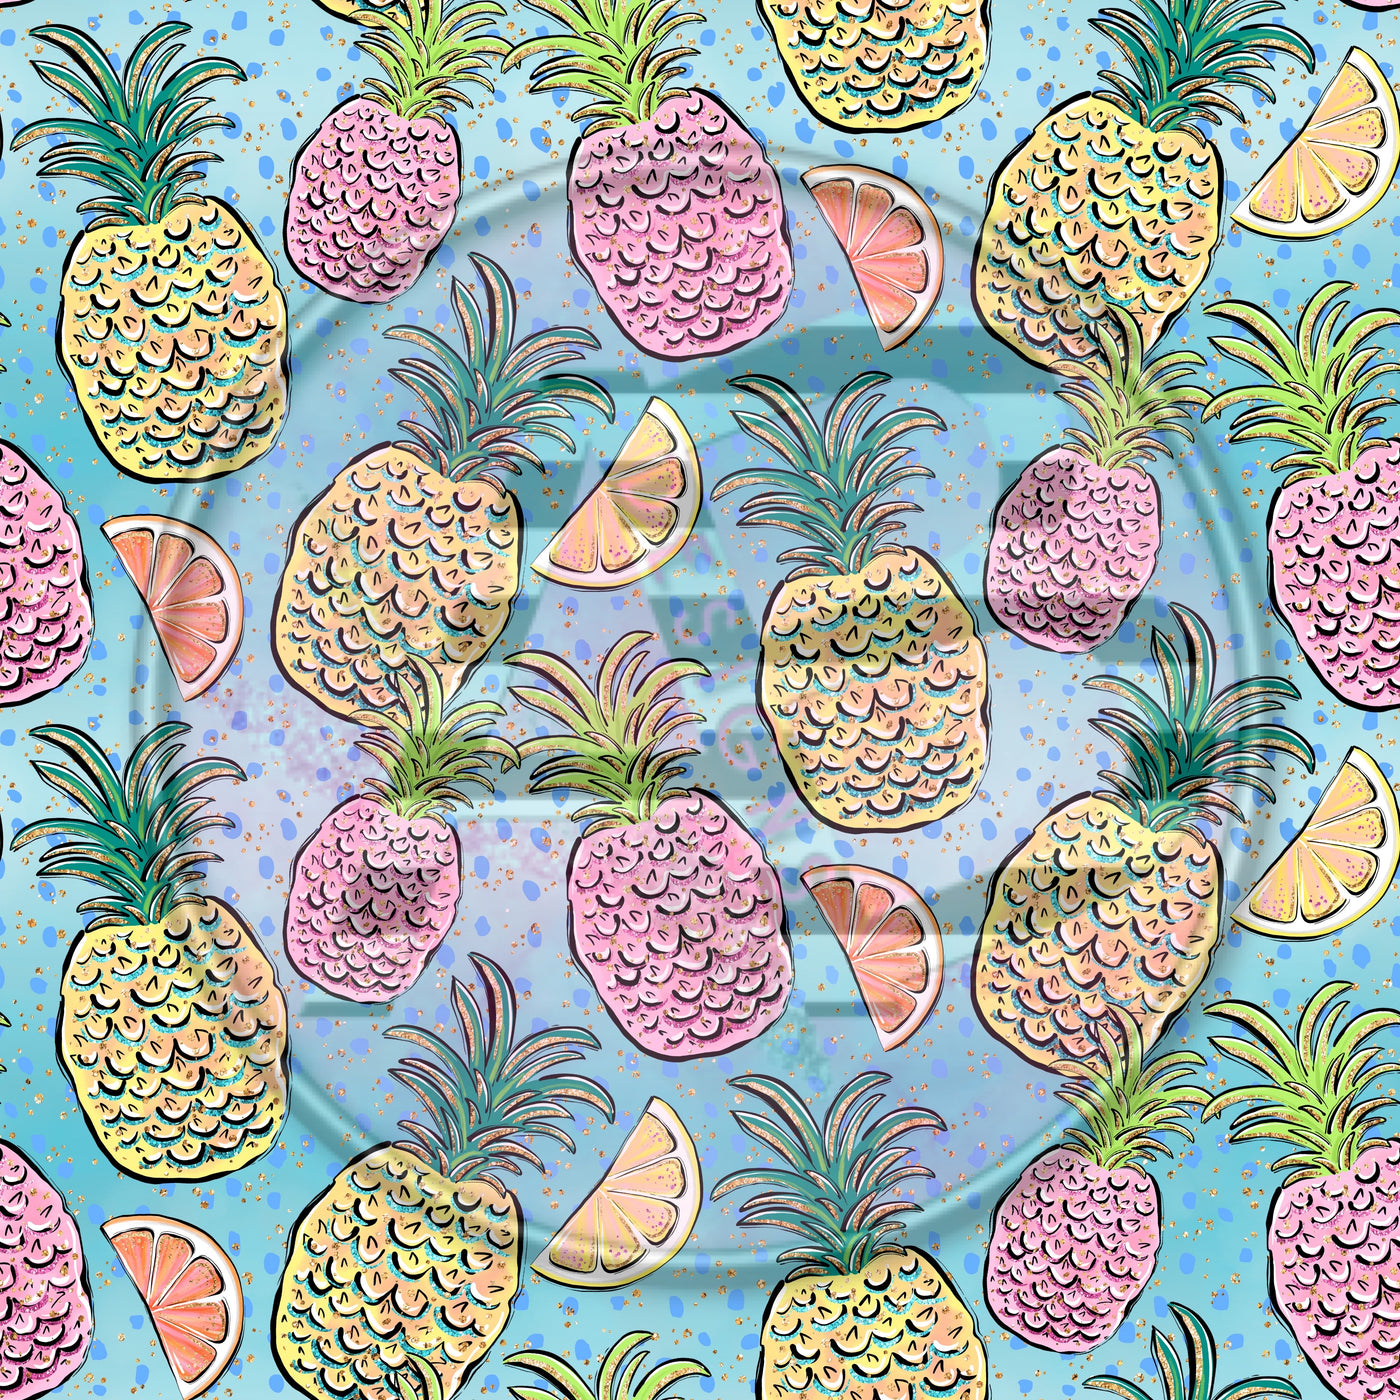 Adhesive Patterned Vinyl -Tropical 699